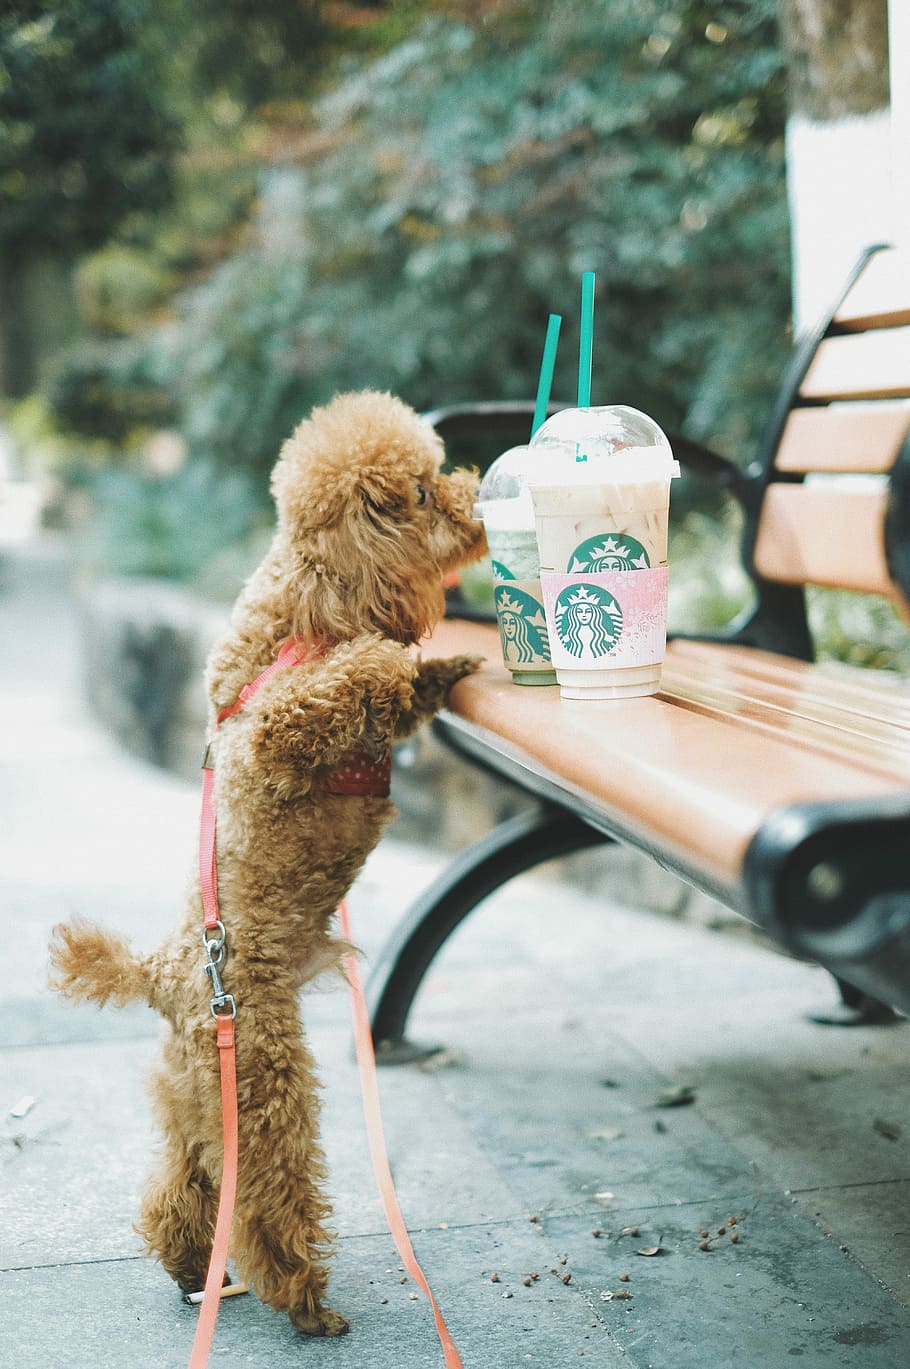 apricot toy poodle standing near brown wooden bench, brown poodle puppy foot reaching Starbucks cup on bench